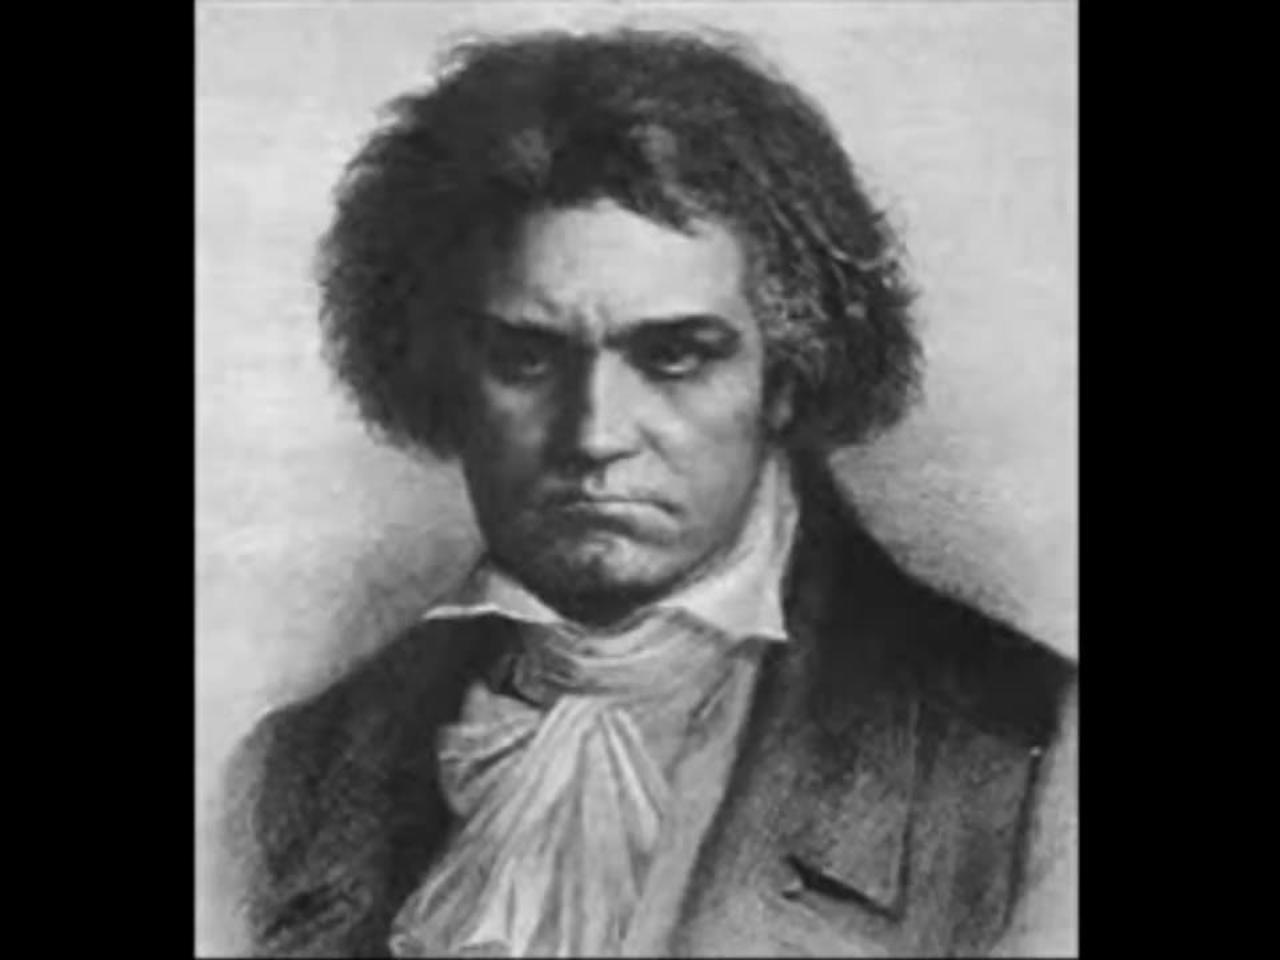 Beethoven's The Symphony No. 3 in E♭ major, Op. 55